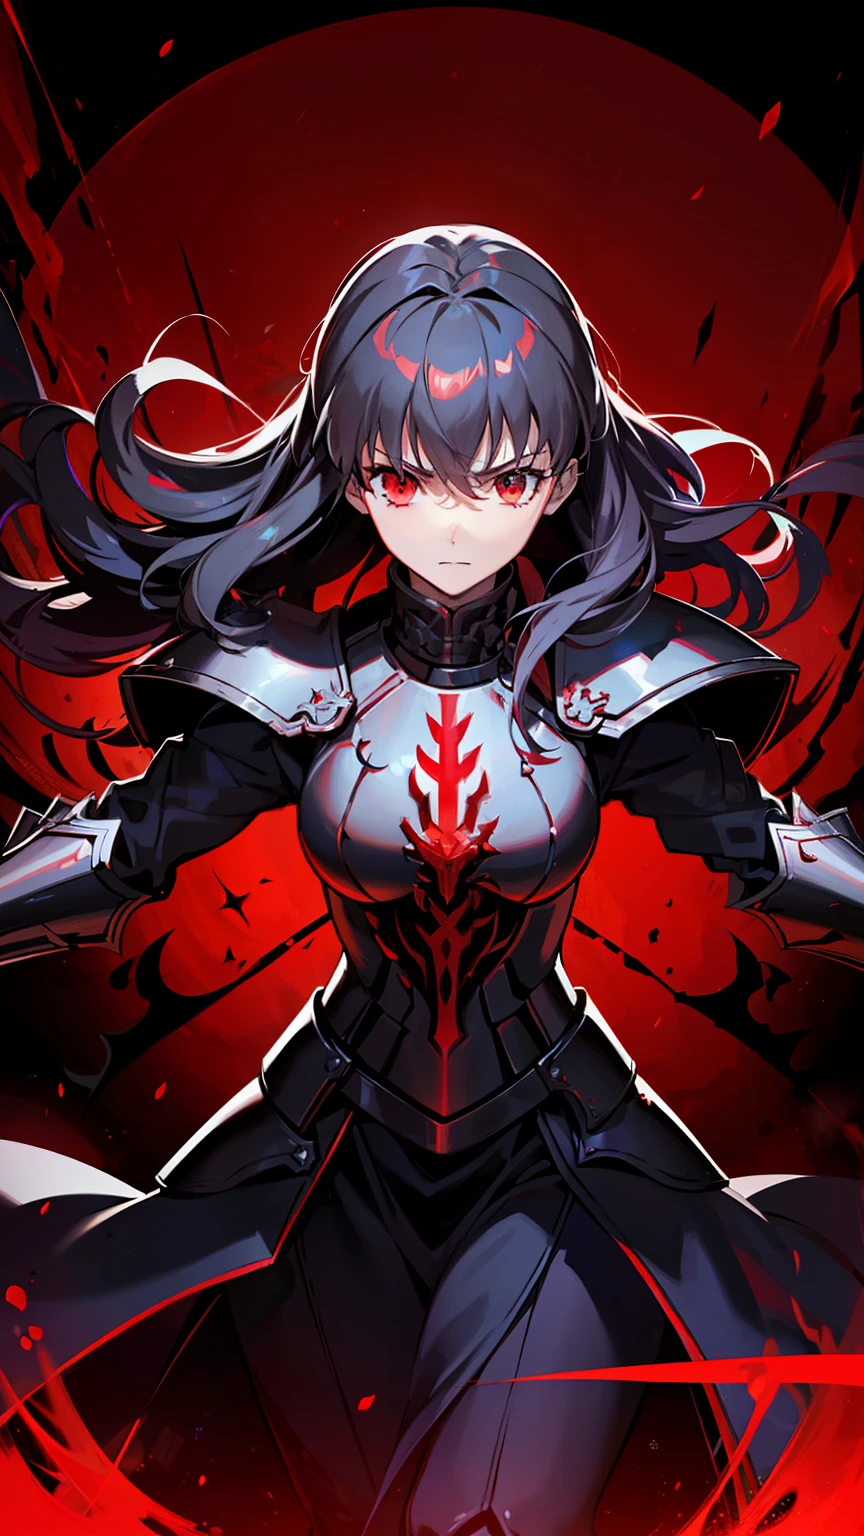 (high-quality, breathtaking),(expressive eyes, perfect face) 1female, girl , solo, young adult, long hair length, wavy curly hair, soft wave, black hair color, red highlights in hair, deep red eye color, background, music, serious confident expression, mature, dominant, haunting red background, armor, onyx black armor with red trim, midnight dark armor with red cracks engraved in the exterior, saber alter, alter saber fate stay night, corrupted theme, corrupted armor, red lines on armor, conquerer vibe, red markings on armor
